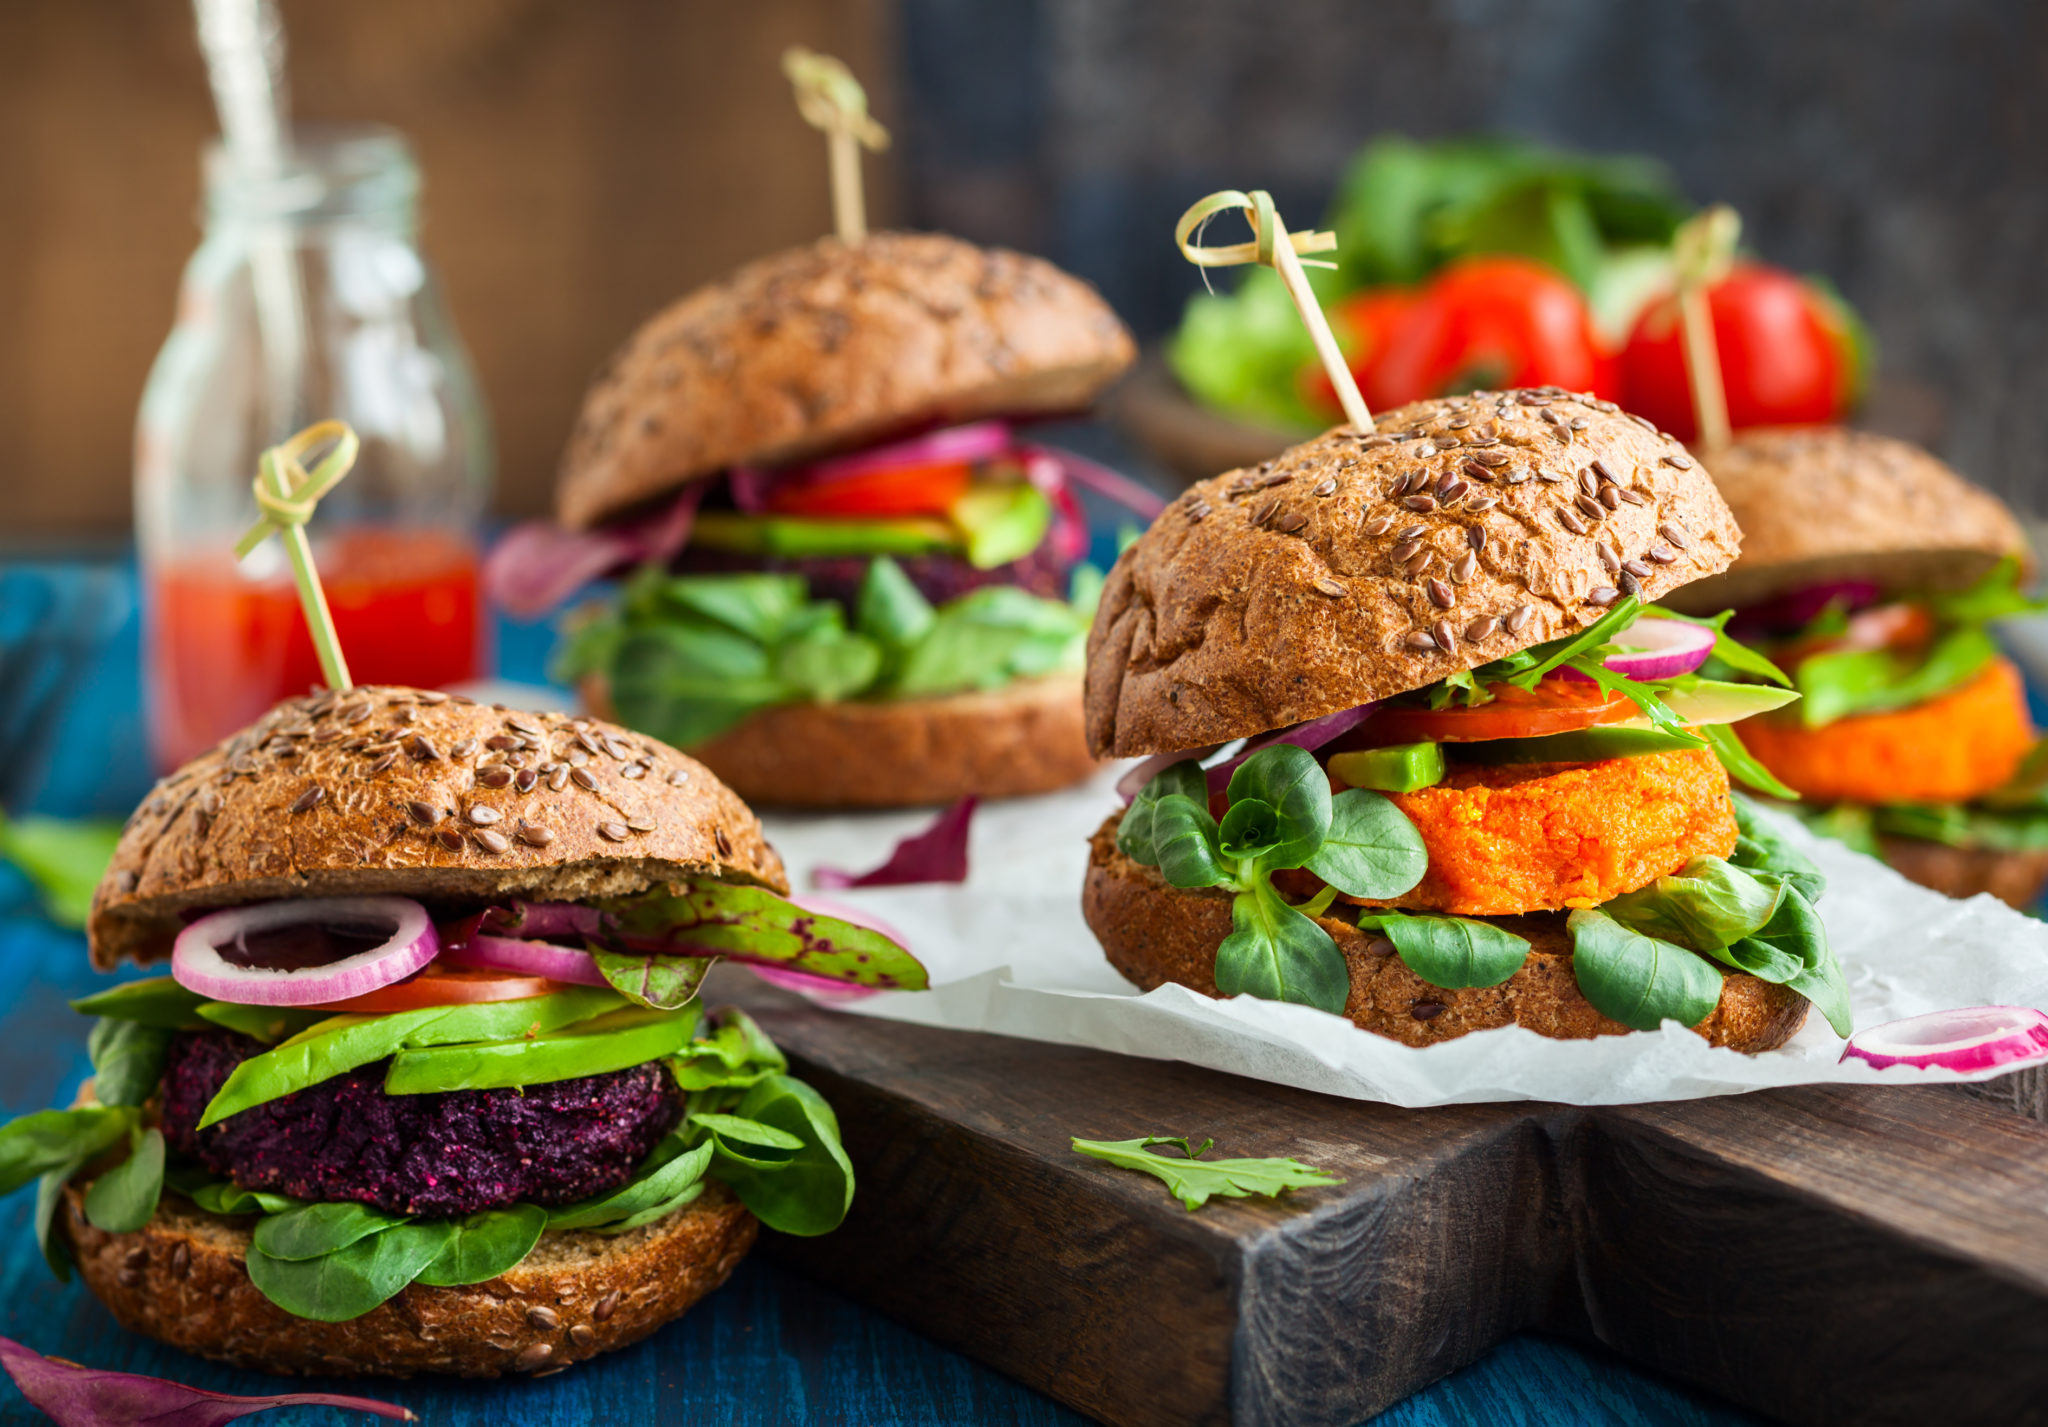 Vegan burgers are a great way to get healthy with great flavor.